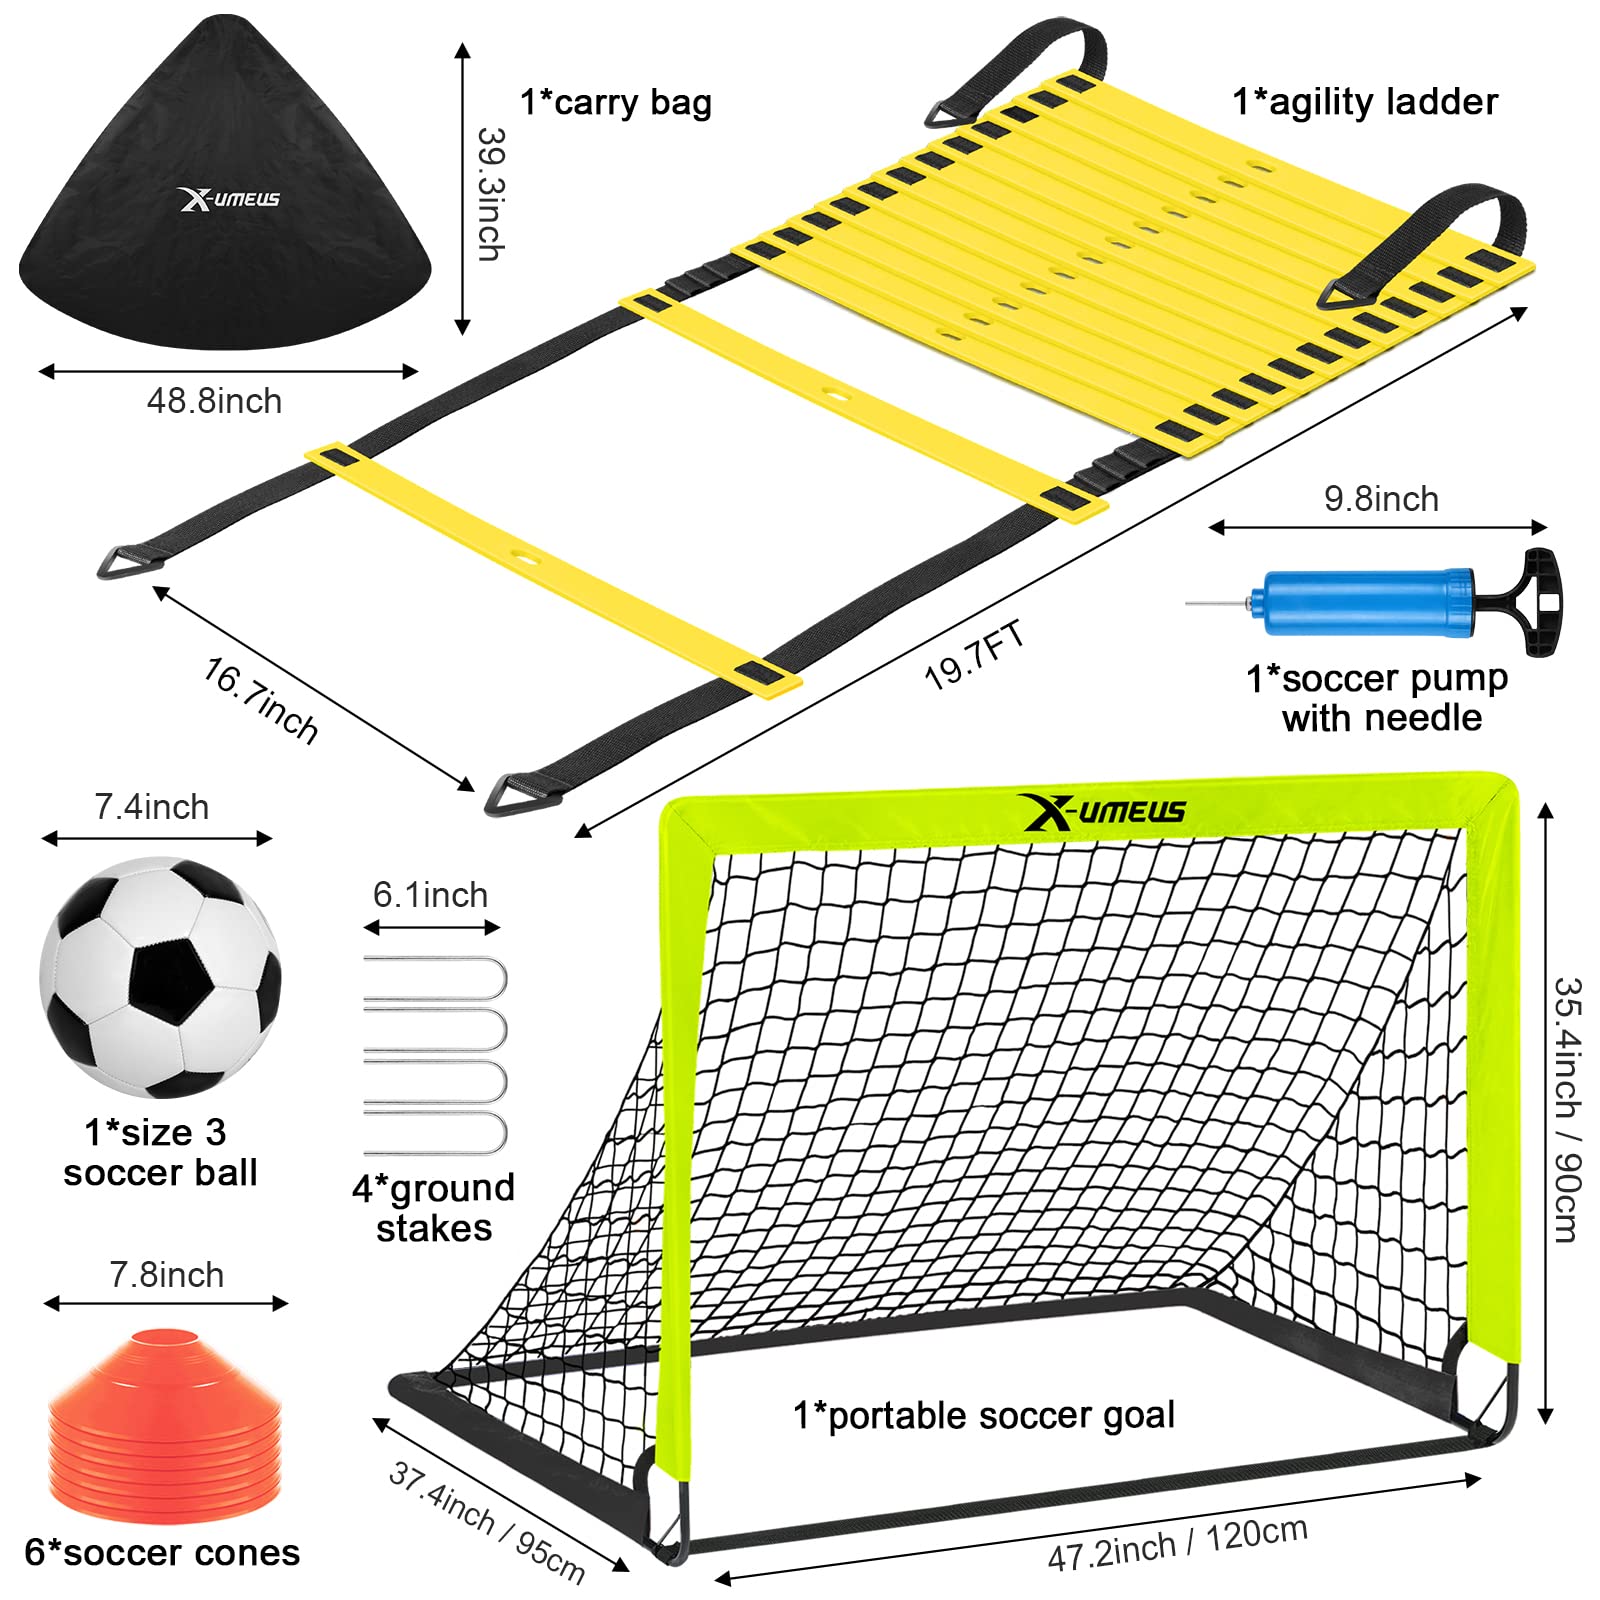 Kids Soccer Goals for Backyard, 4' x 3' Pop Up Toddler Soccer Goal Training Equipment with Soccer Ball, Agility Ladder and Cones, Portable Soccer Nets for Backyard for Kids Youth Outdoor Sports Games